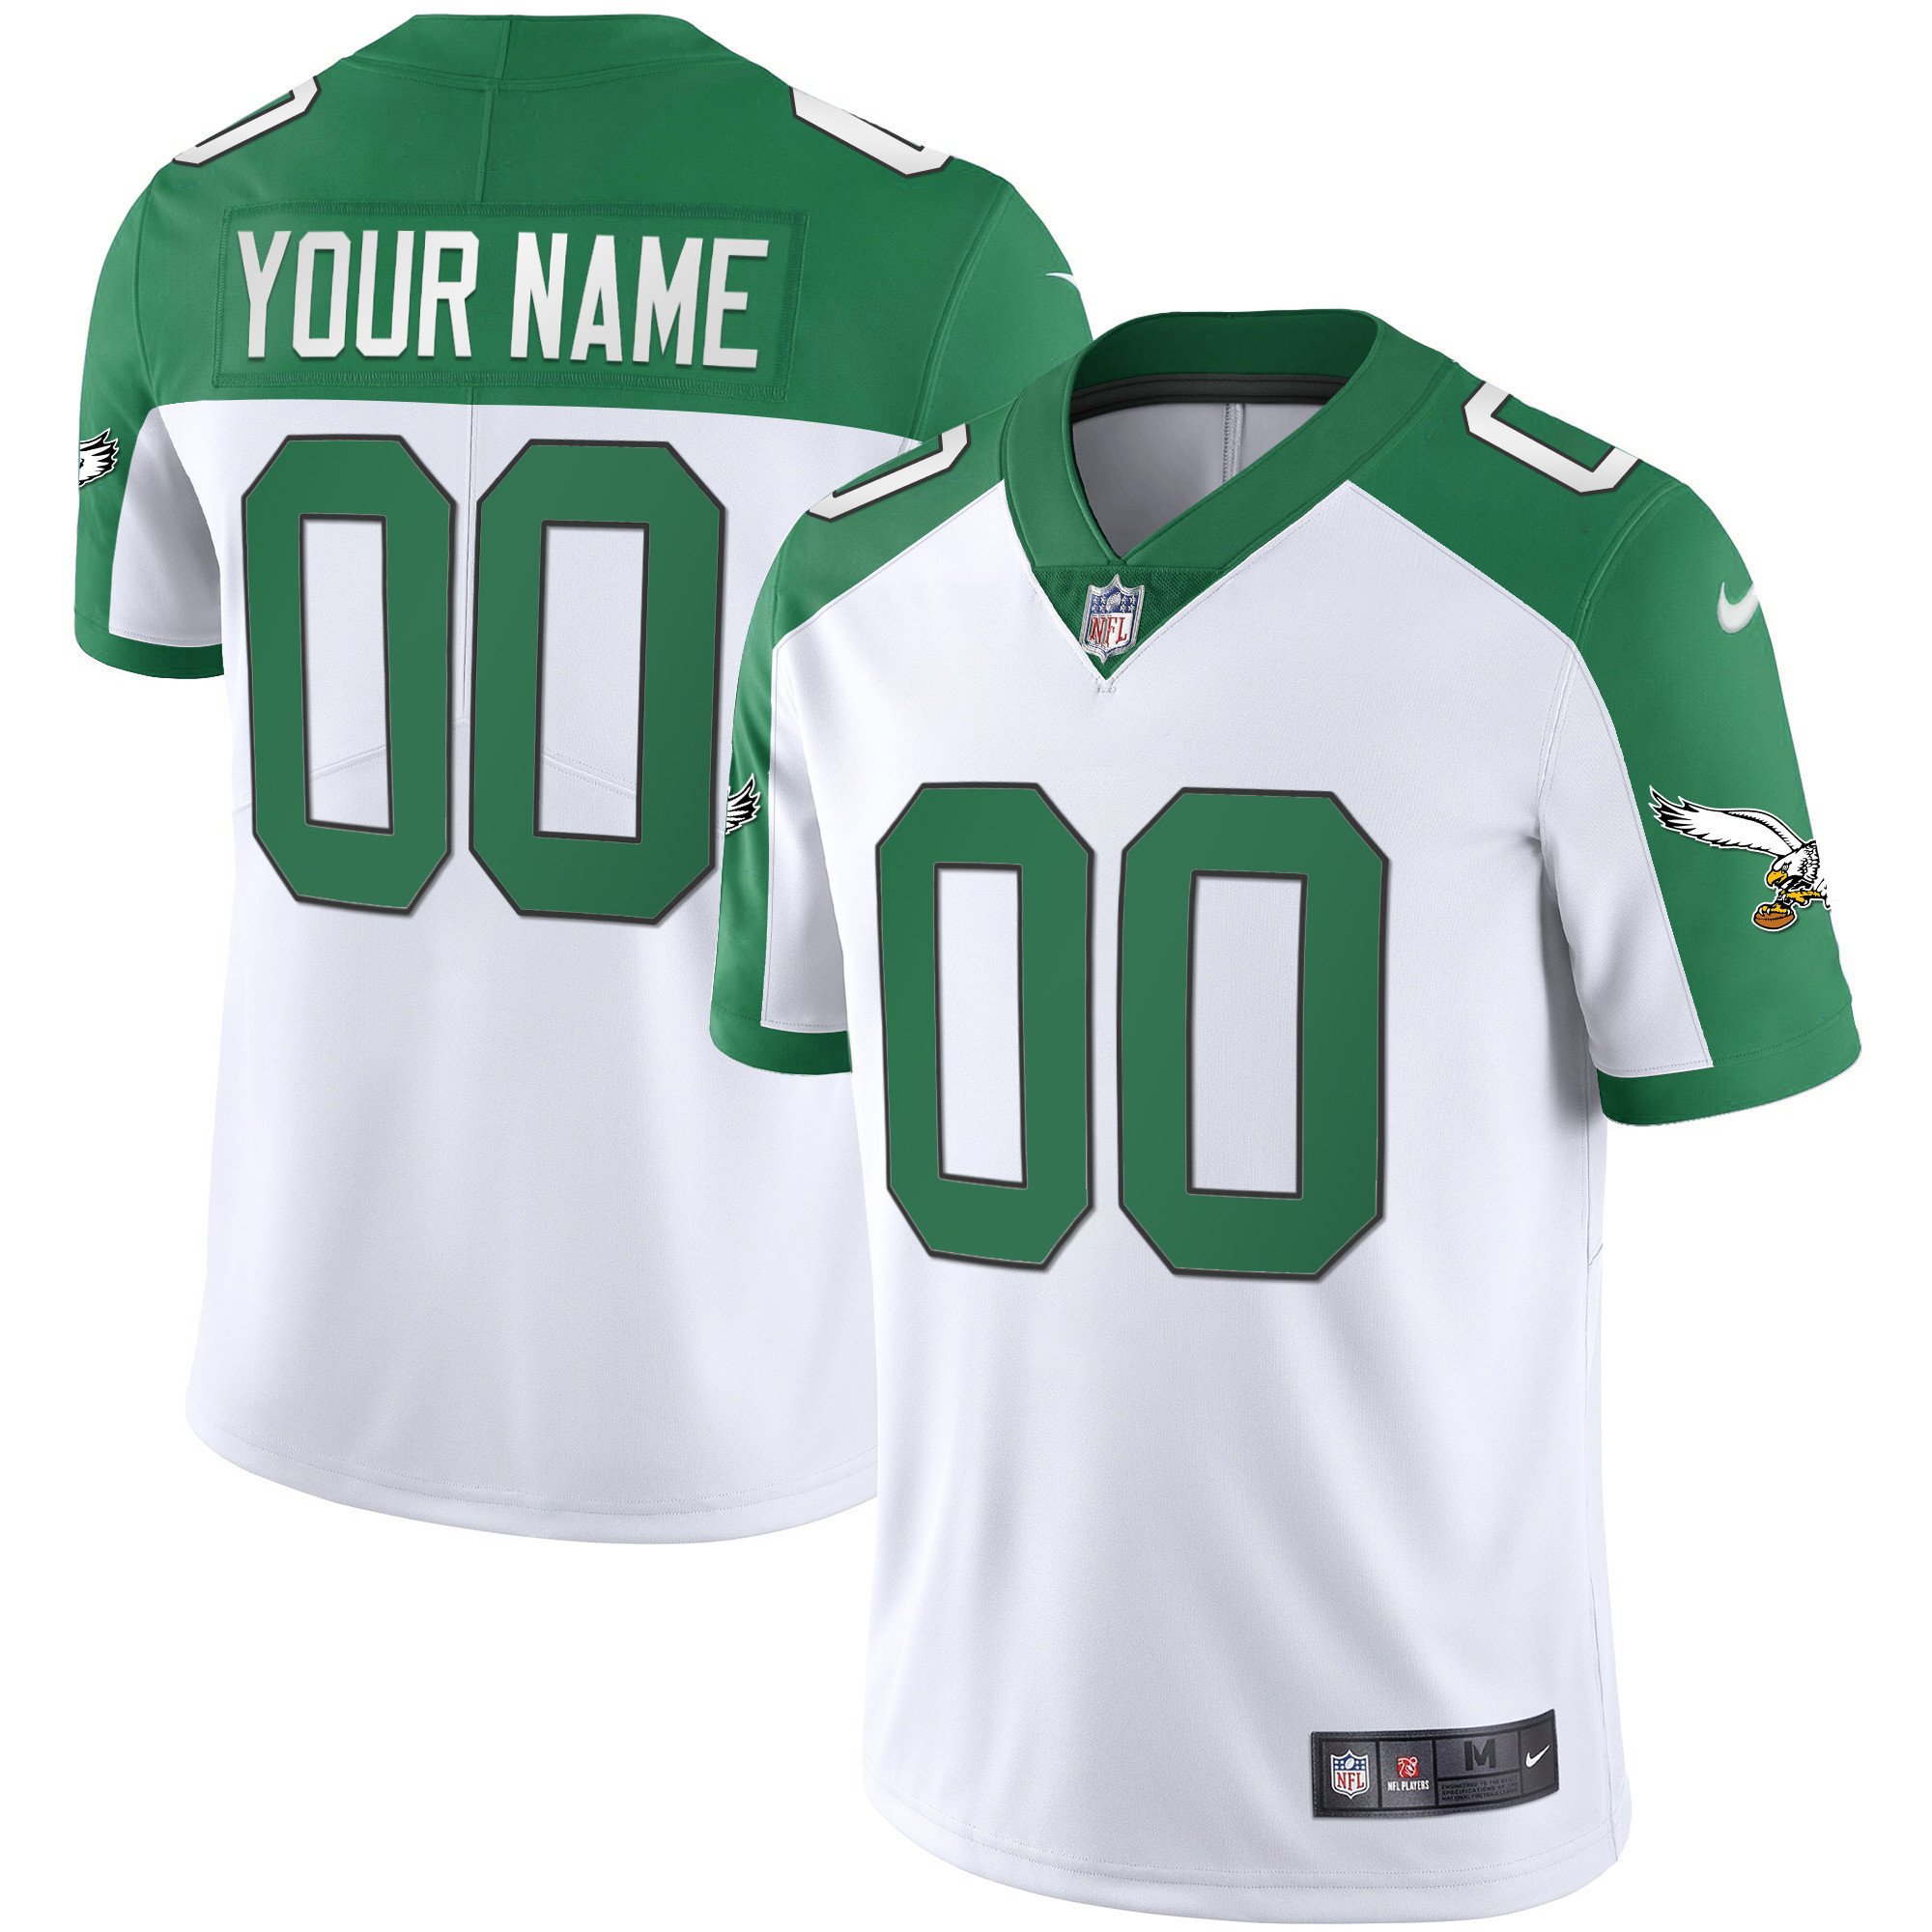 Eagles Alternate Kelly Green & Gold Custom Jersey - All Stitched